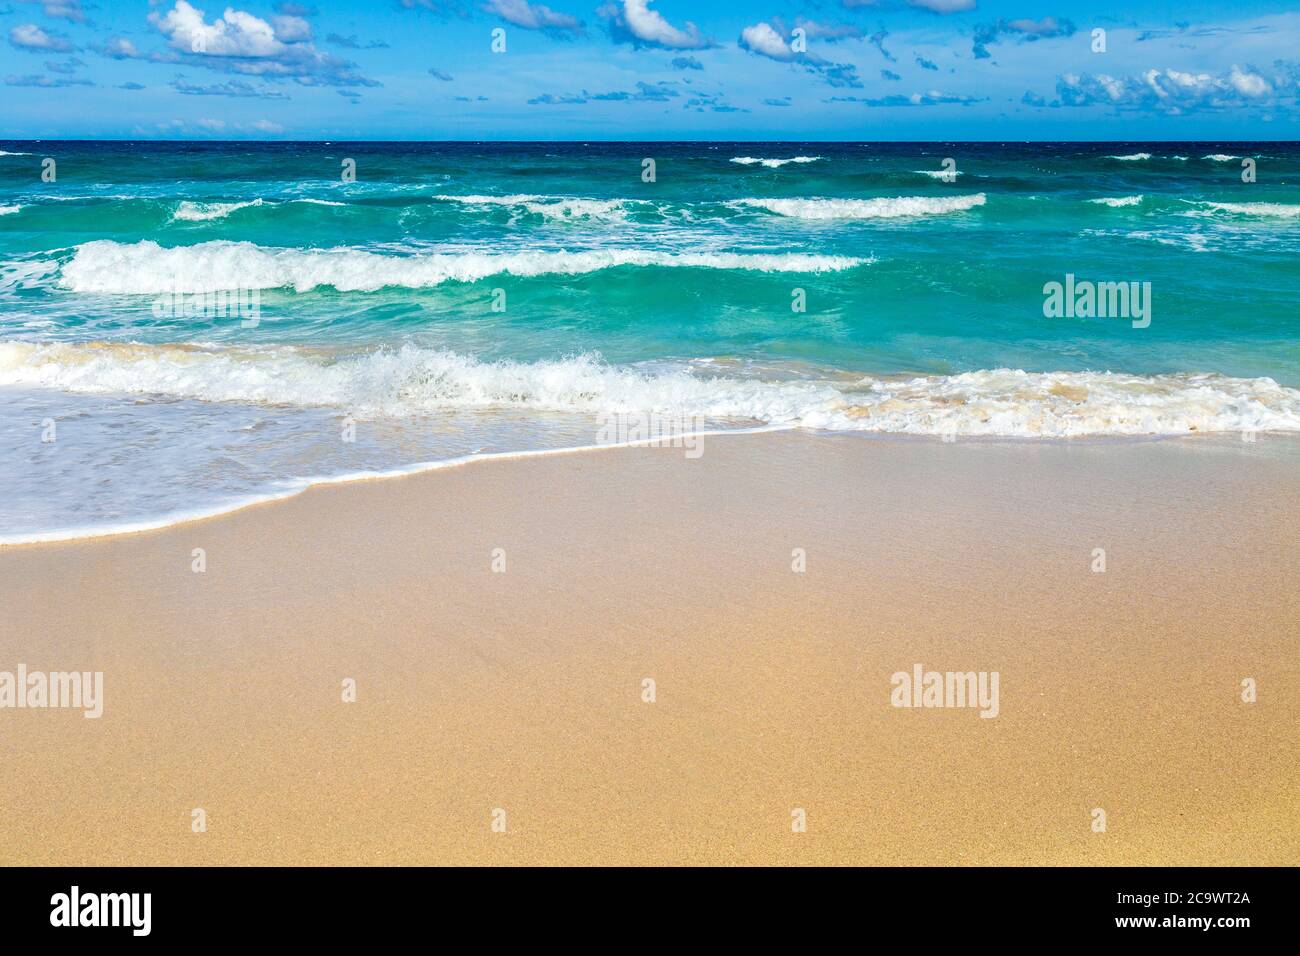 Clean sand and blue water at Platja de Llevant, Formentera, Spain Stock Photo